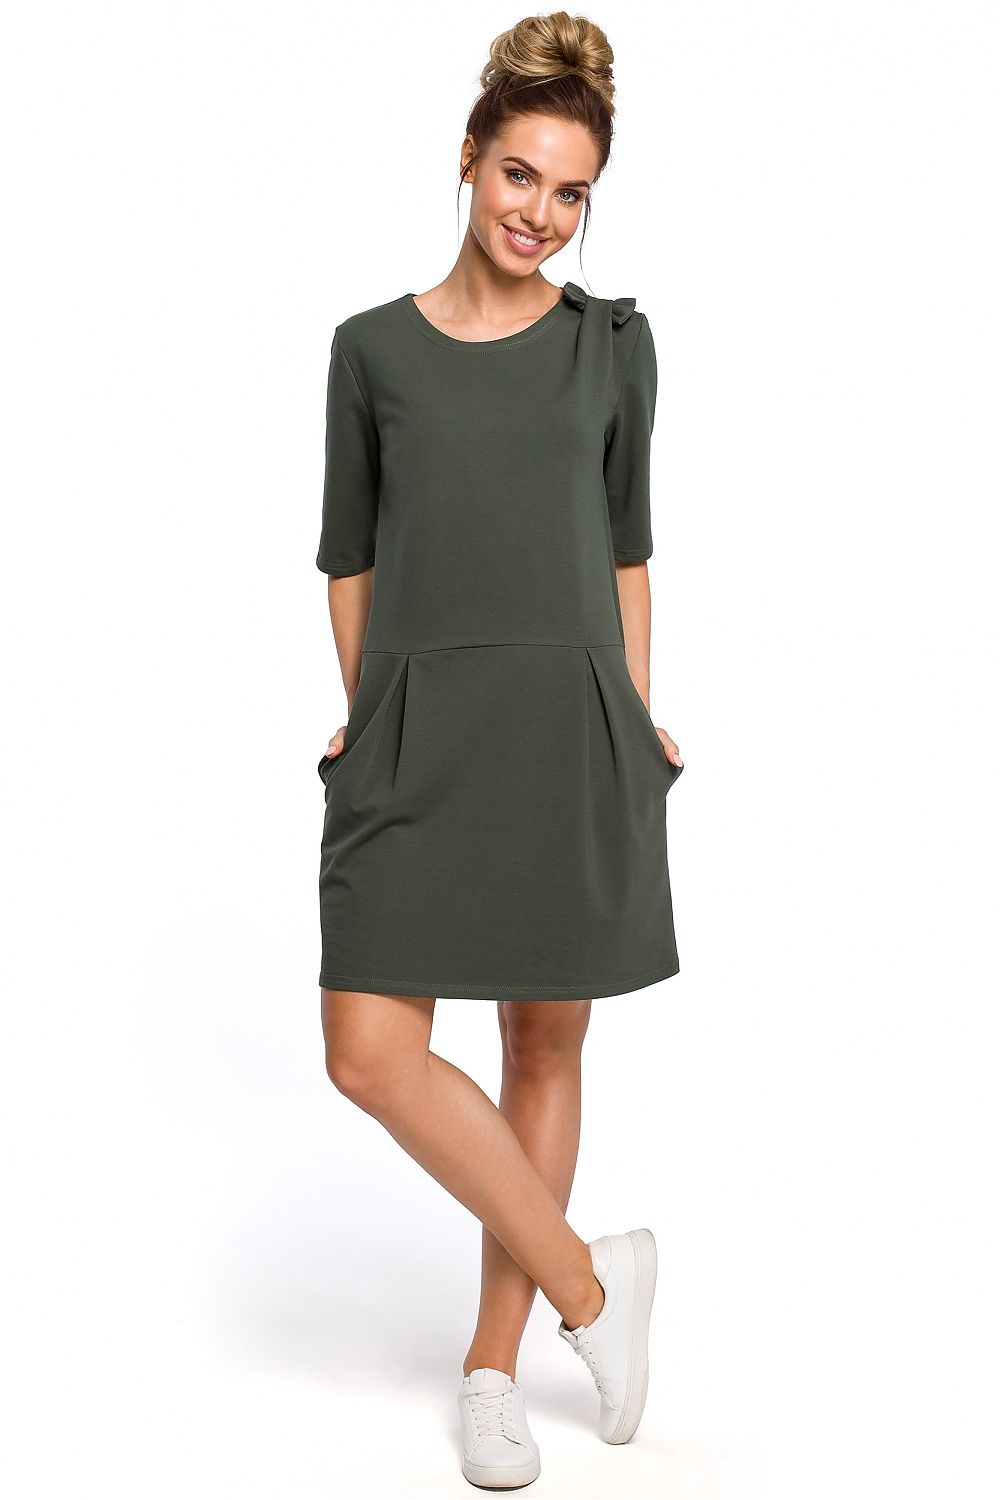 Minimalism Dropped Waist Dress with A Cute Bow on Shoulder